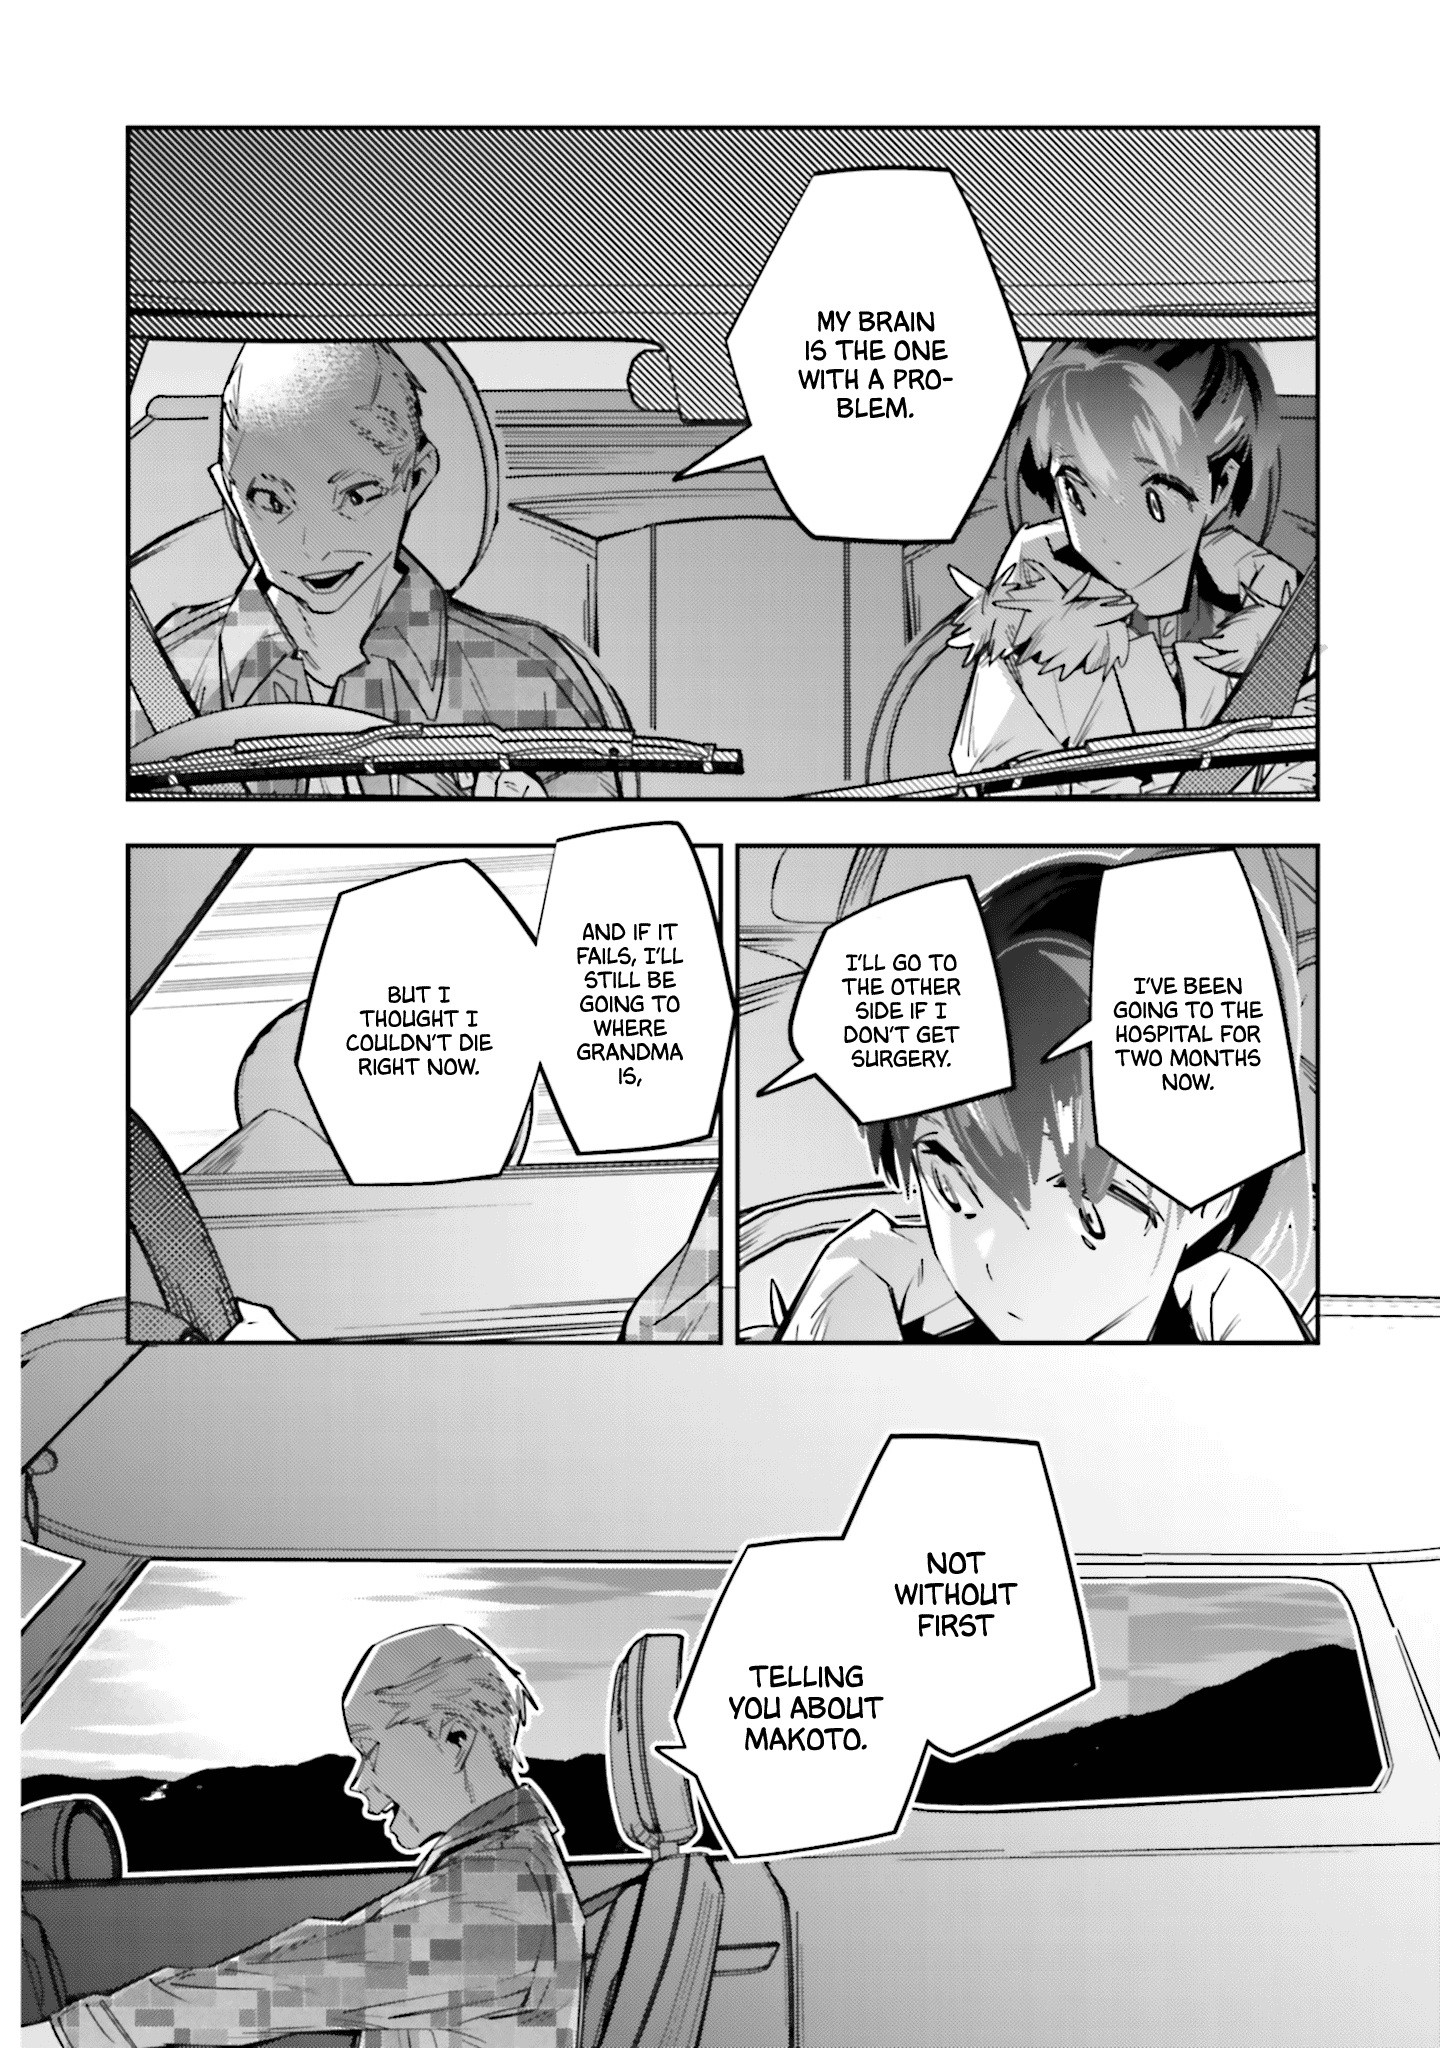 I Reincarnated As The Little Sister Of A Death Game Manga's Murder Mastermind And Failed Chapter 3 #22